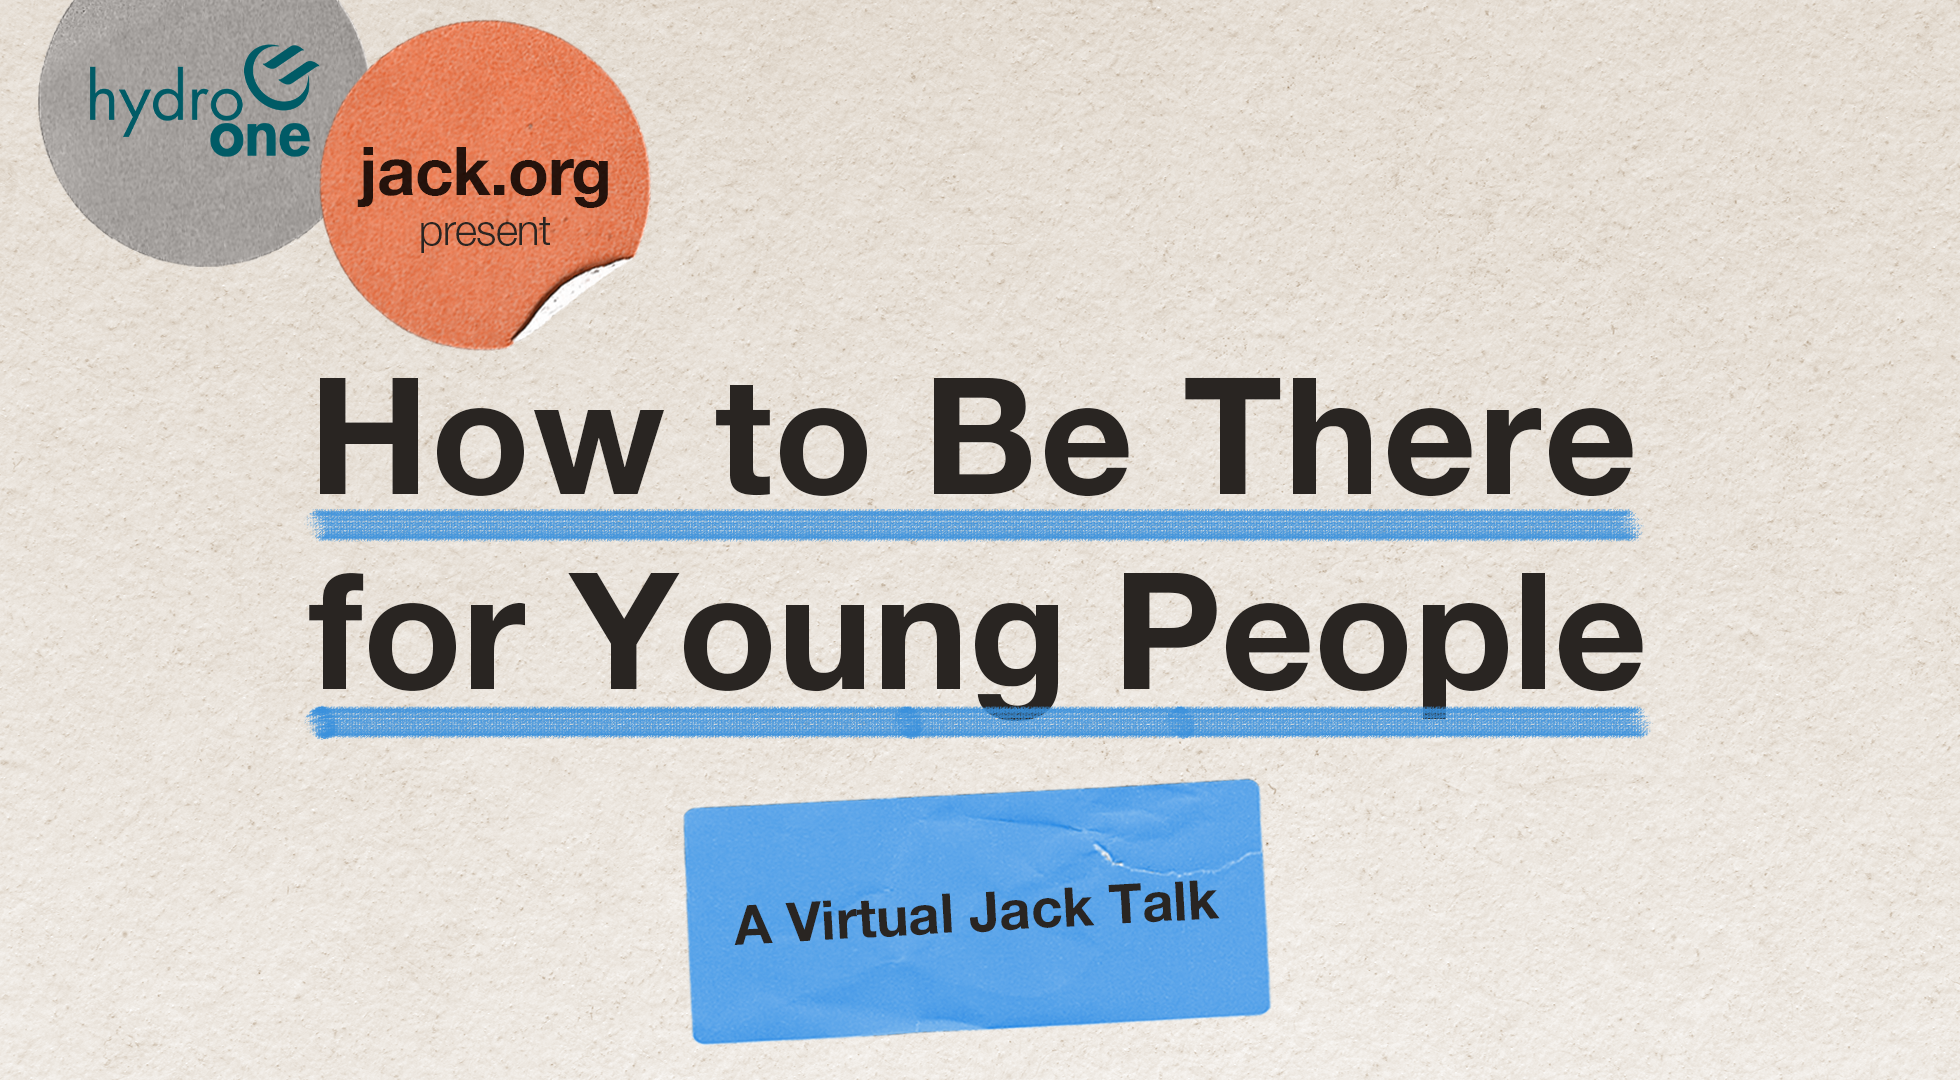 Jack.org and Hydro One Present: How to Be There for Young People